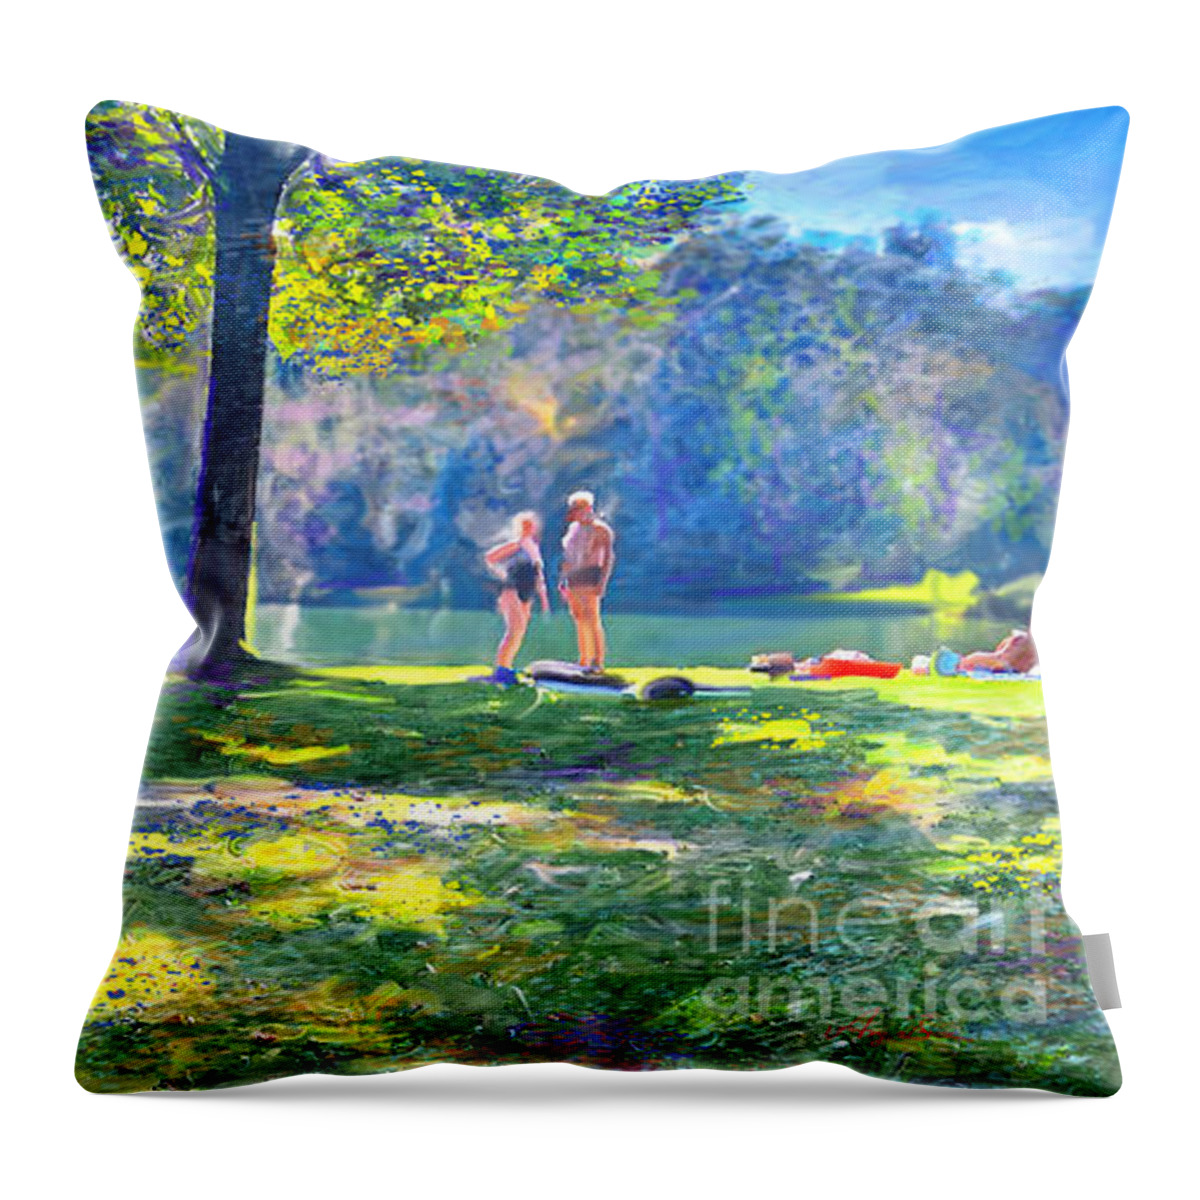 Angiebraun Throw Pillow featuring the painting Summer2020 by Angie Braun